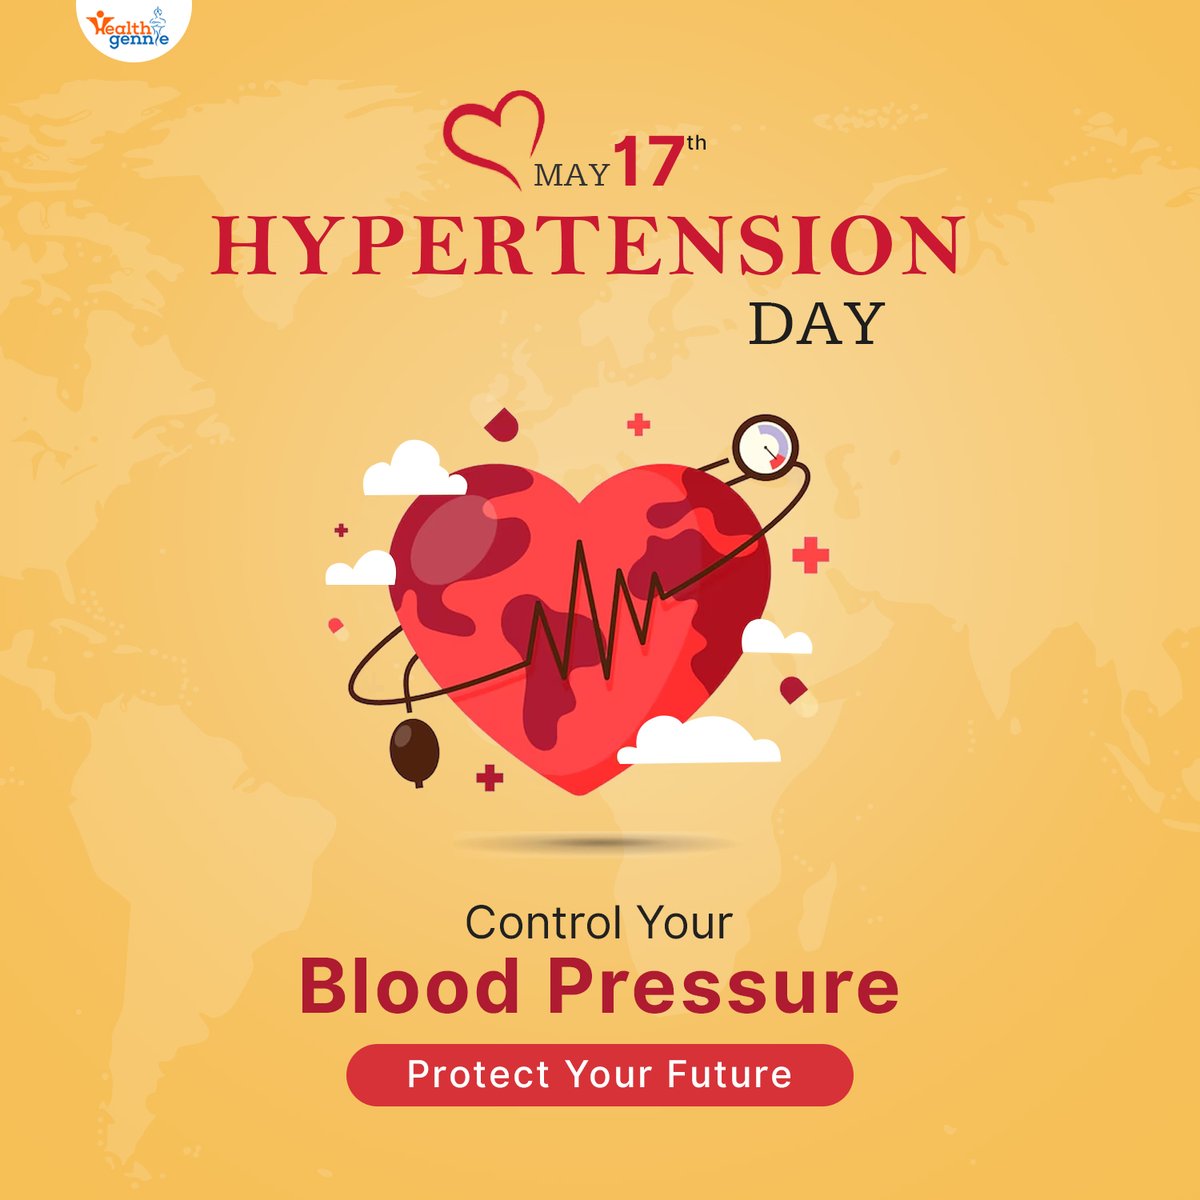 Hypertension is a silent killer, but you have the power to silence it. Get your blood pressure checked today! 🌍💓 
#worldhypertensionday #hearthealth #silentkiller #healthawareness #checkyourpressure #bloodpressureawareness #healthyheart #preventhypertension @healthgennie1